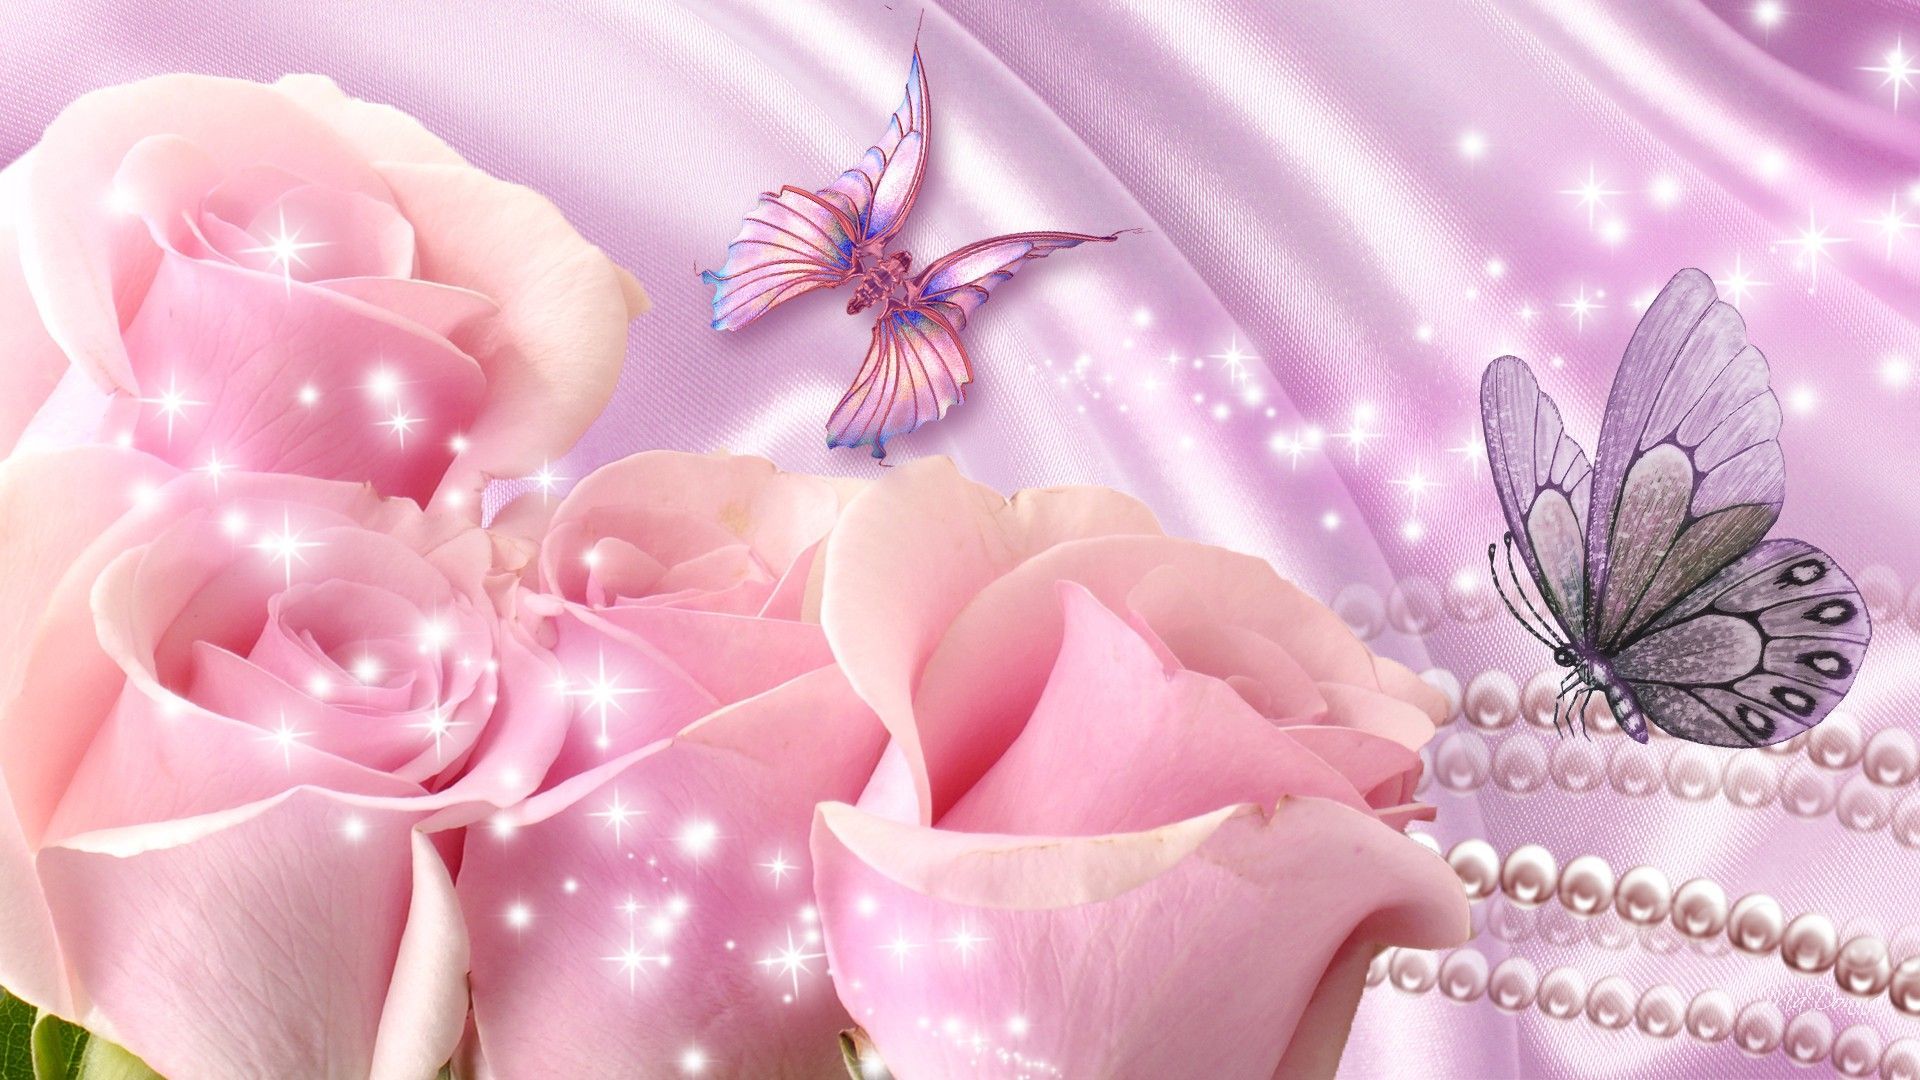 Roses And Butterflies Wallpaper Google Search Rose